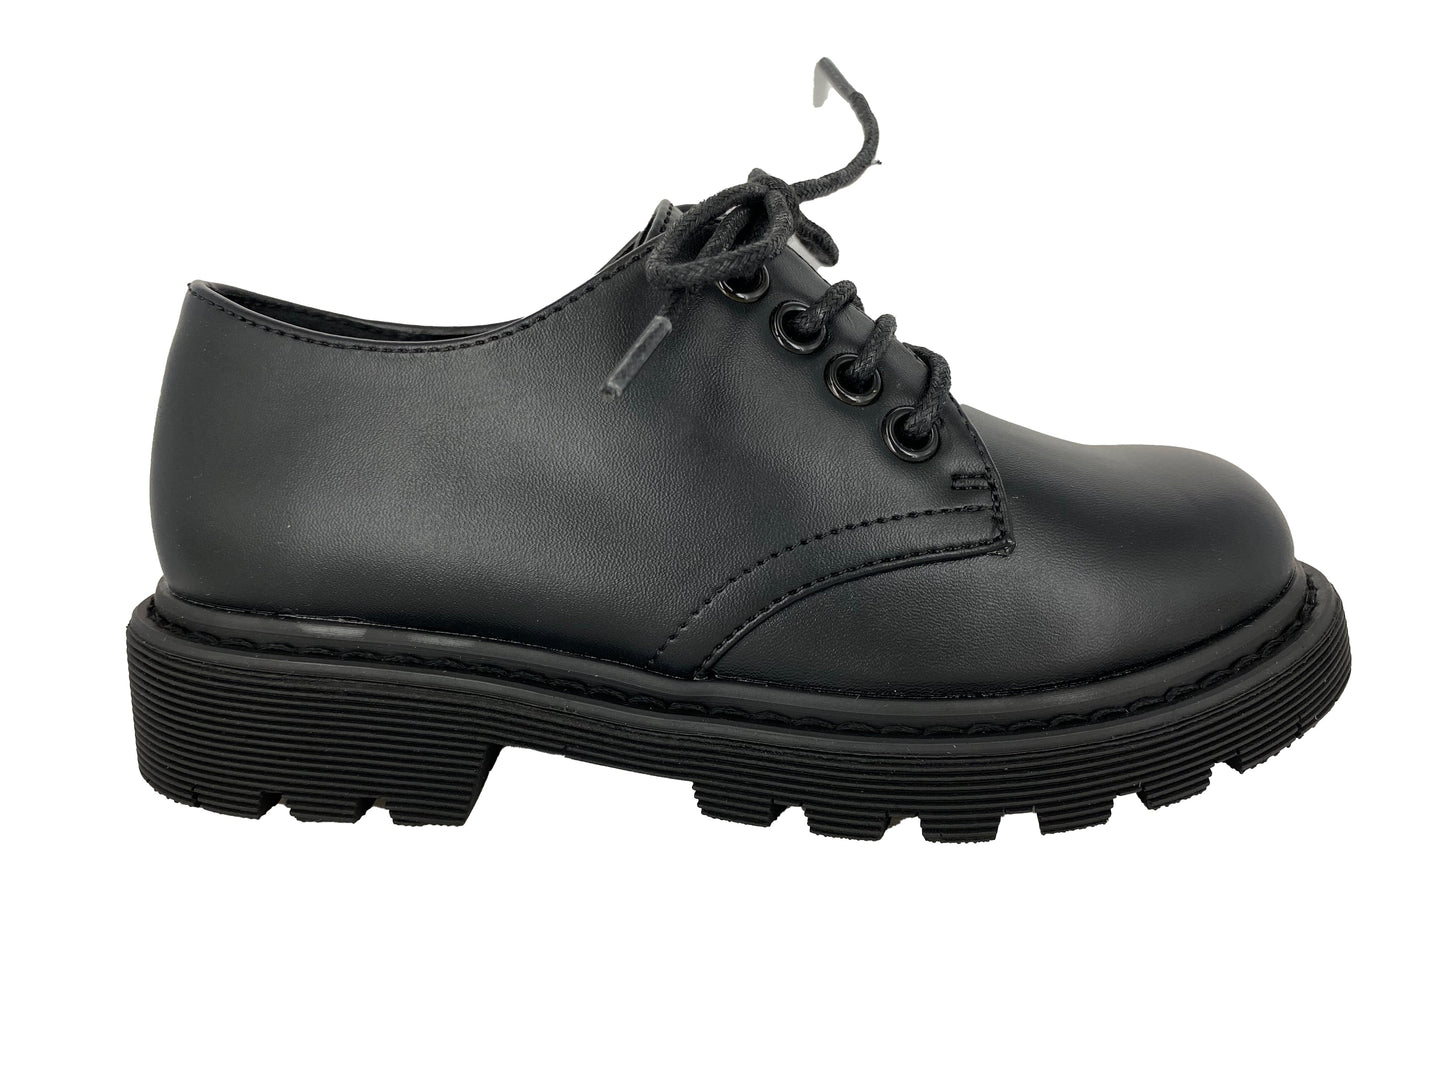 Gotta Flurt Girl's Academy Black Synthetic Leather Oxford Student Shoes